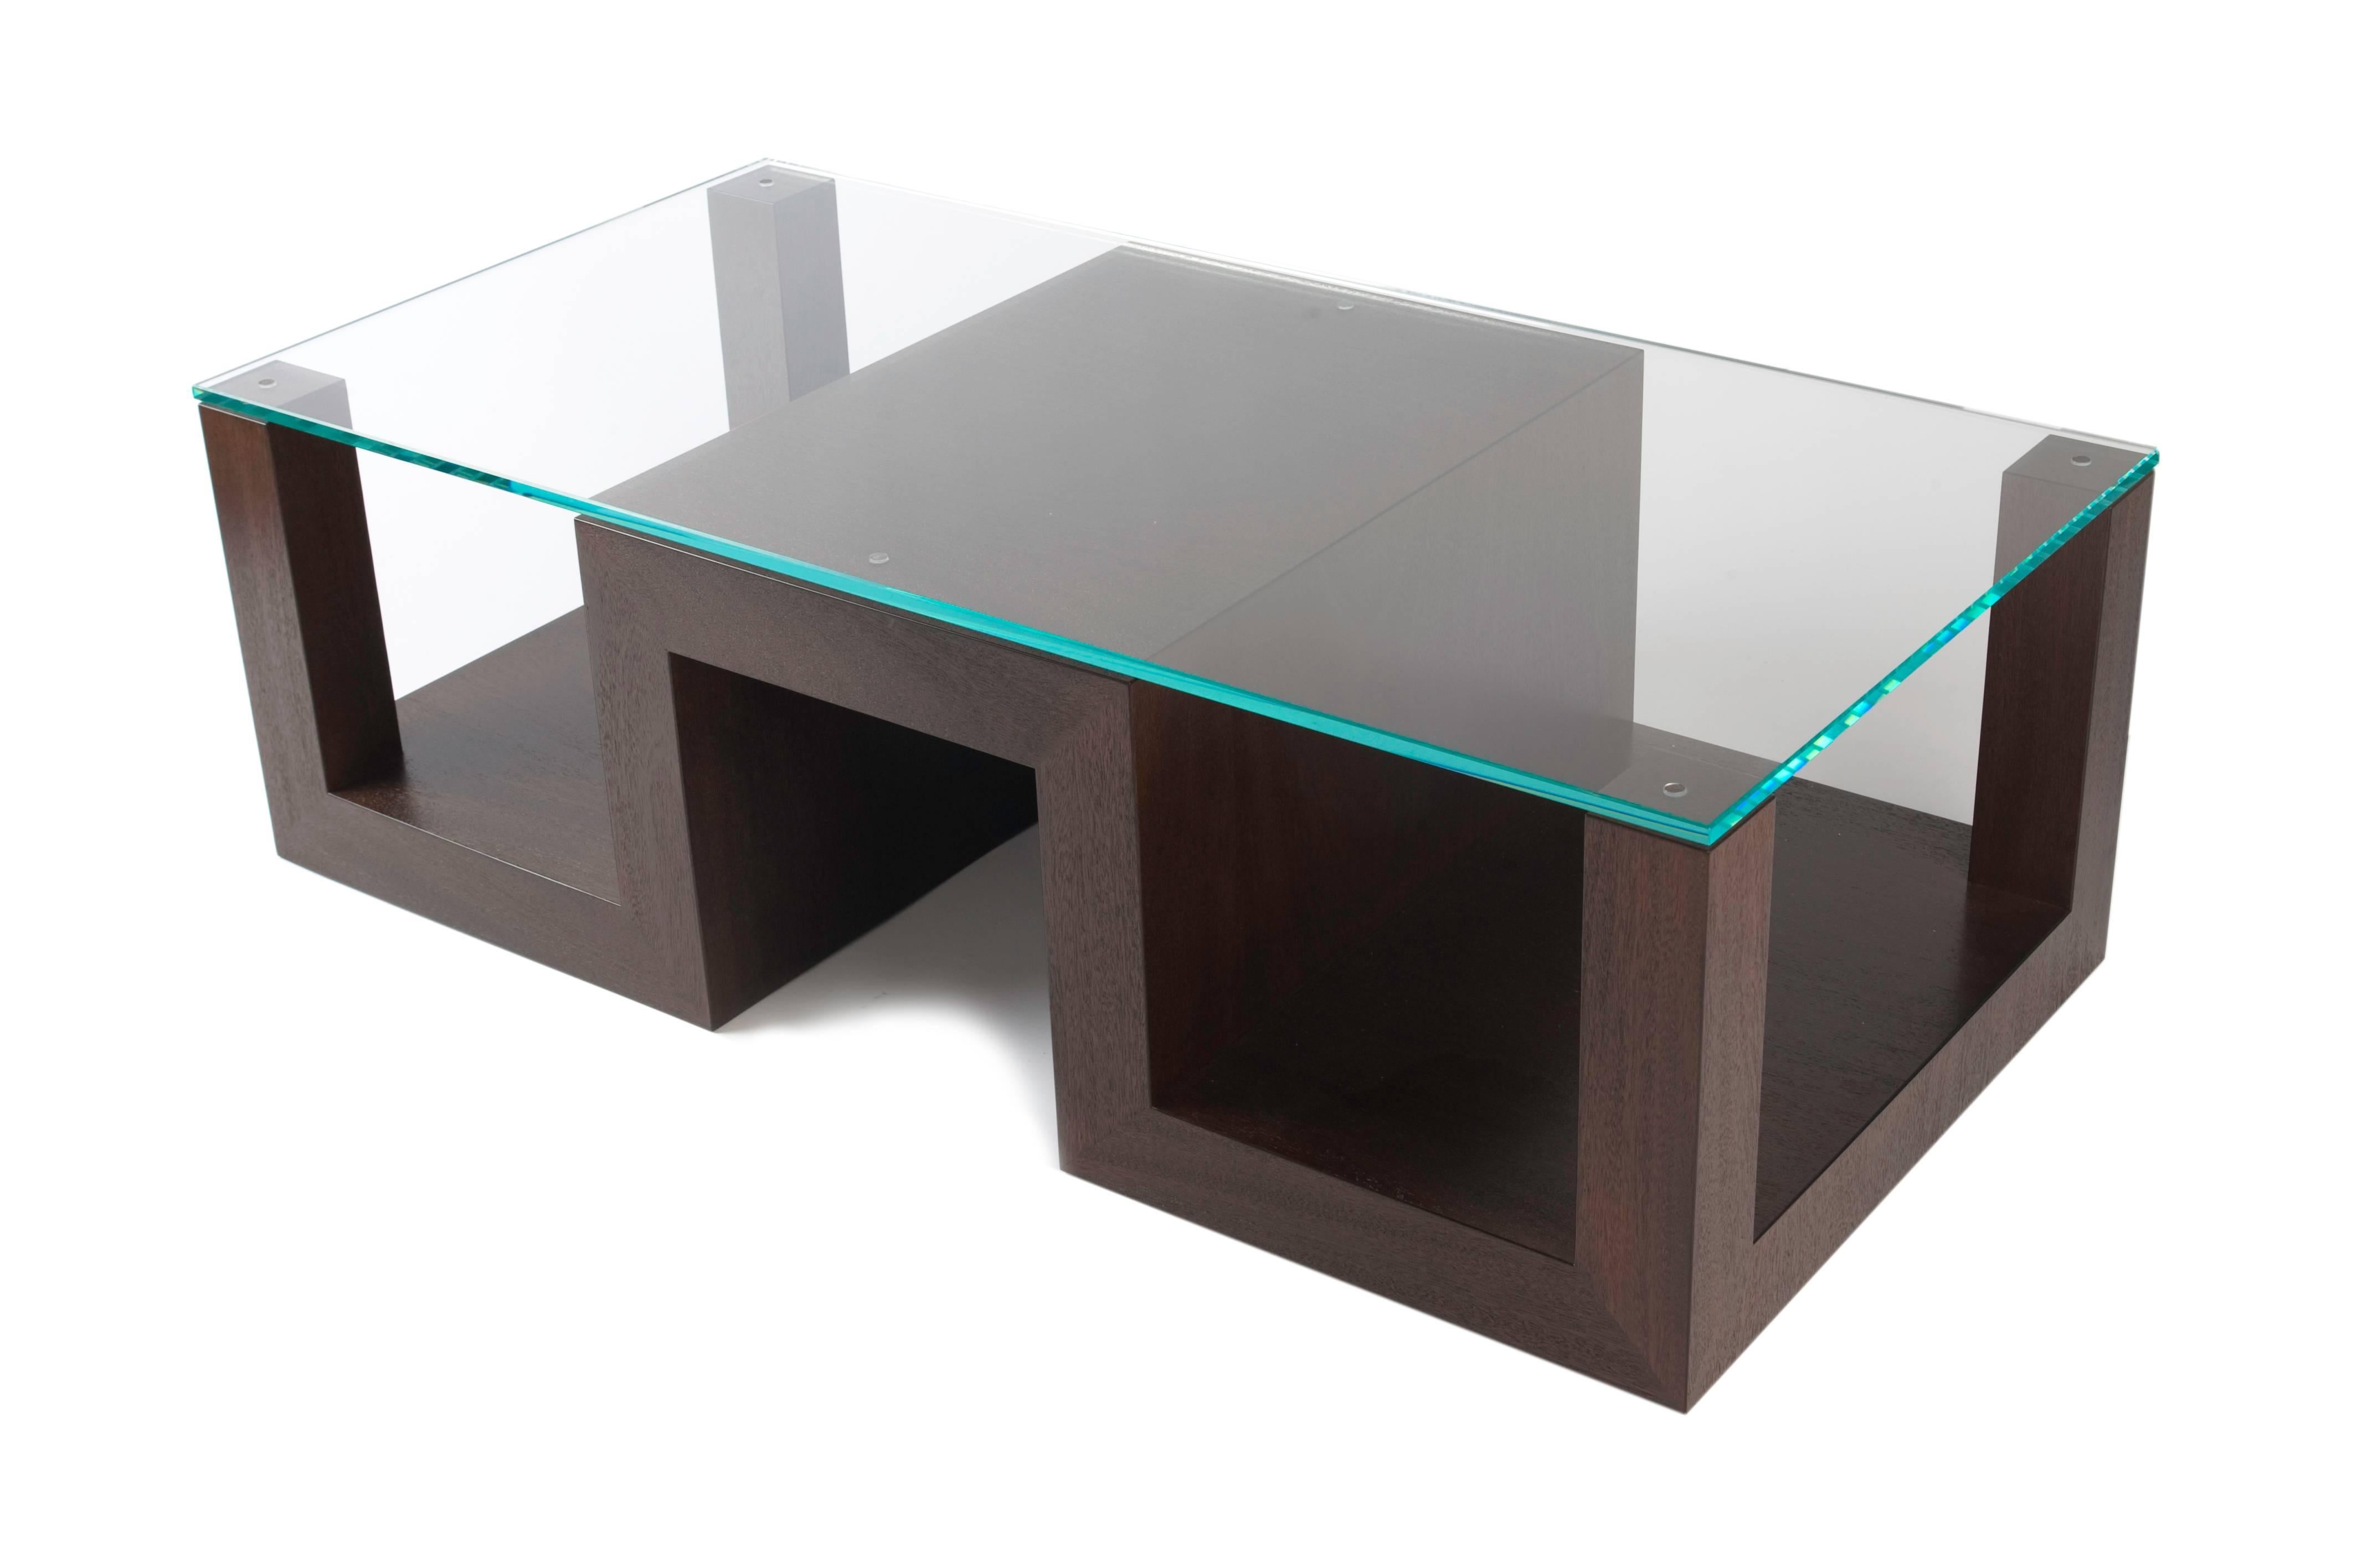 The five points table is a more traditional take on a coffee table. The five subtle contact points of the beautifully hand-finished wood base are a perfect complement to the steel-cut-glass.